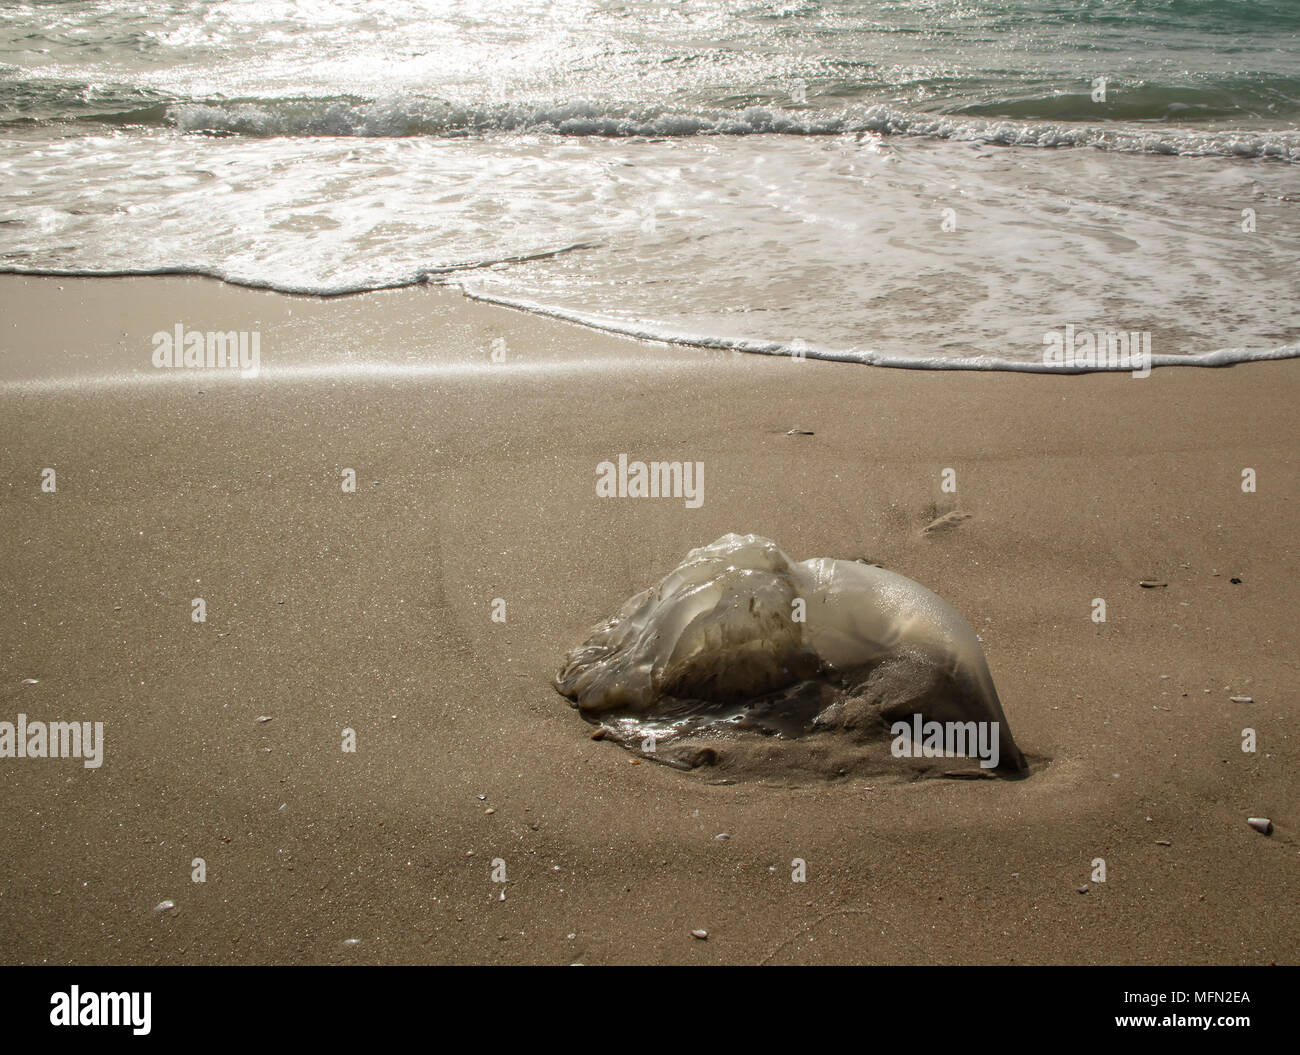 A washed ashore jellyfish, with the sea waves in the background Stock Photo